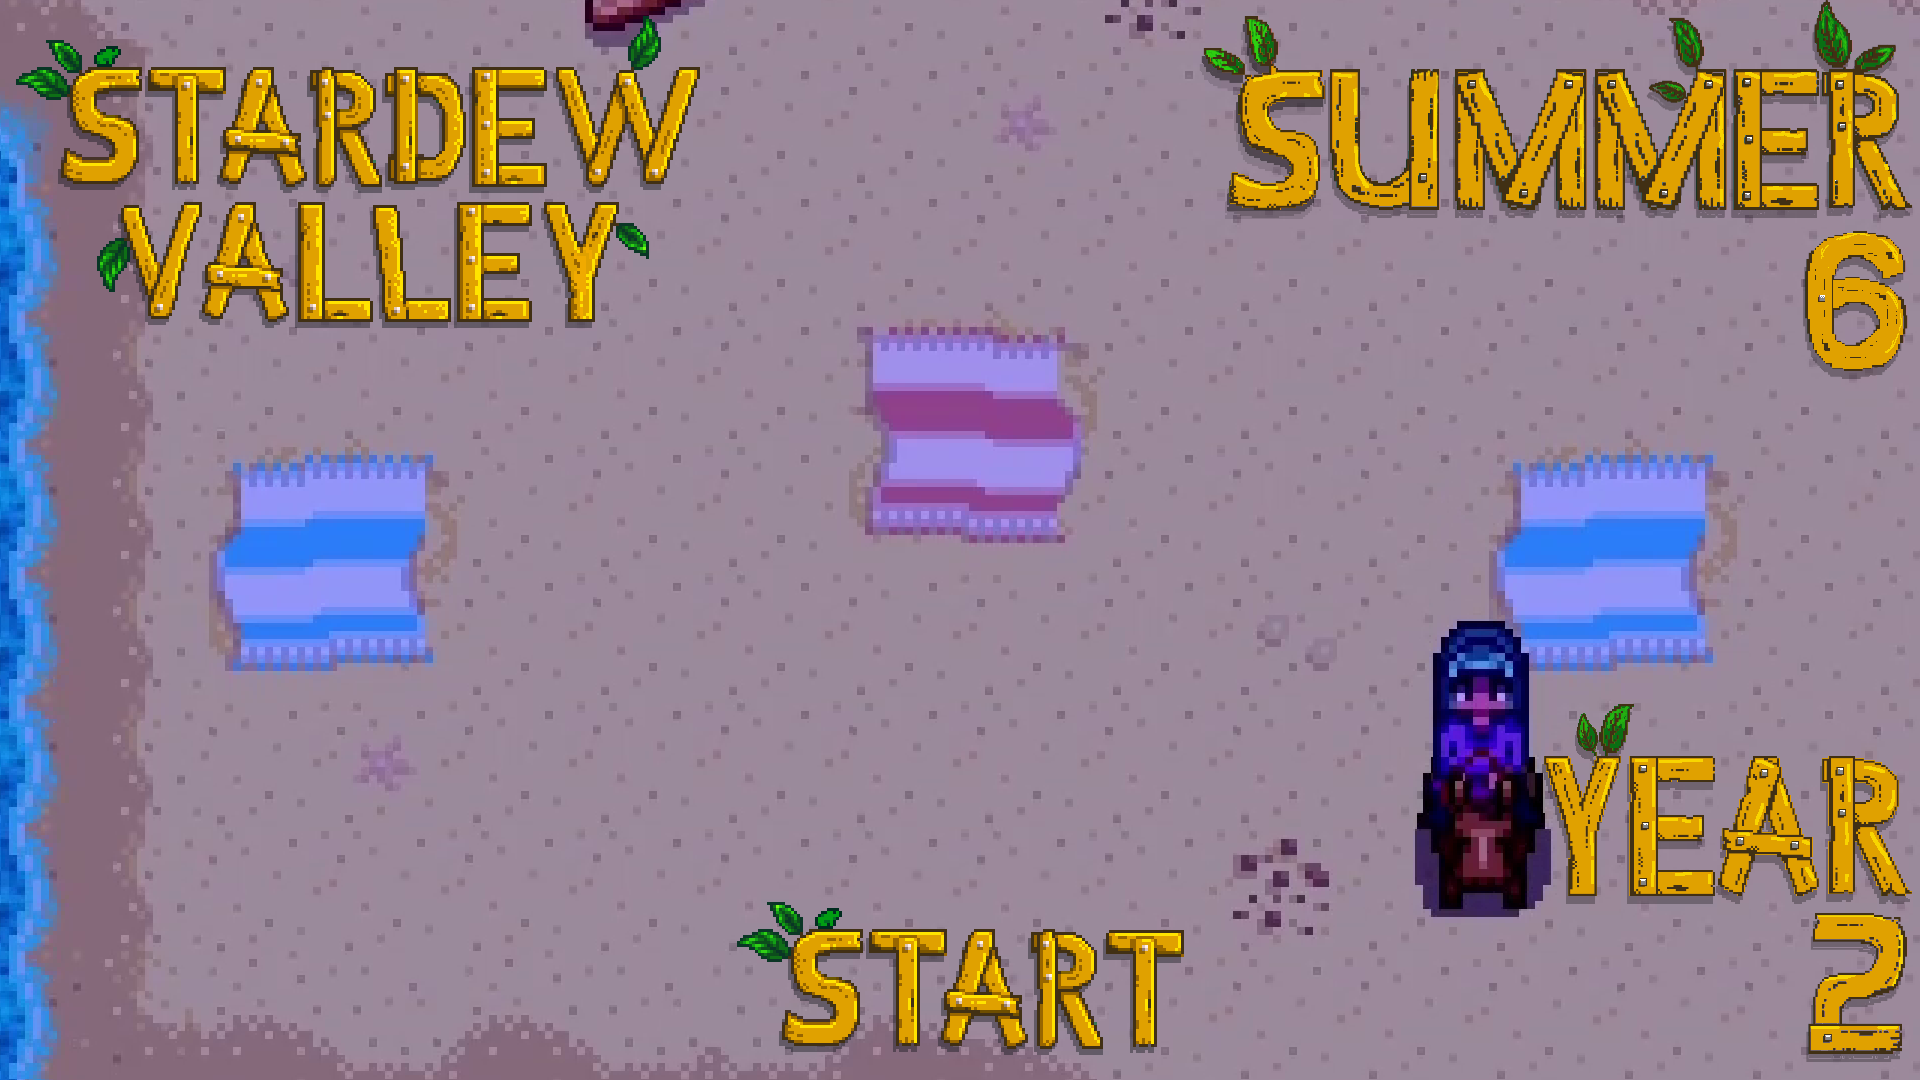 The Story of the Three Towels – Stardew Valley, Summer 6, Year 2, Start